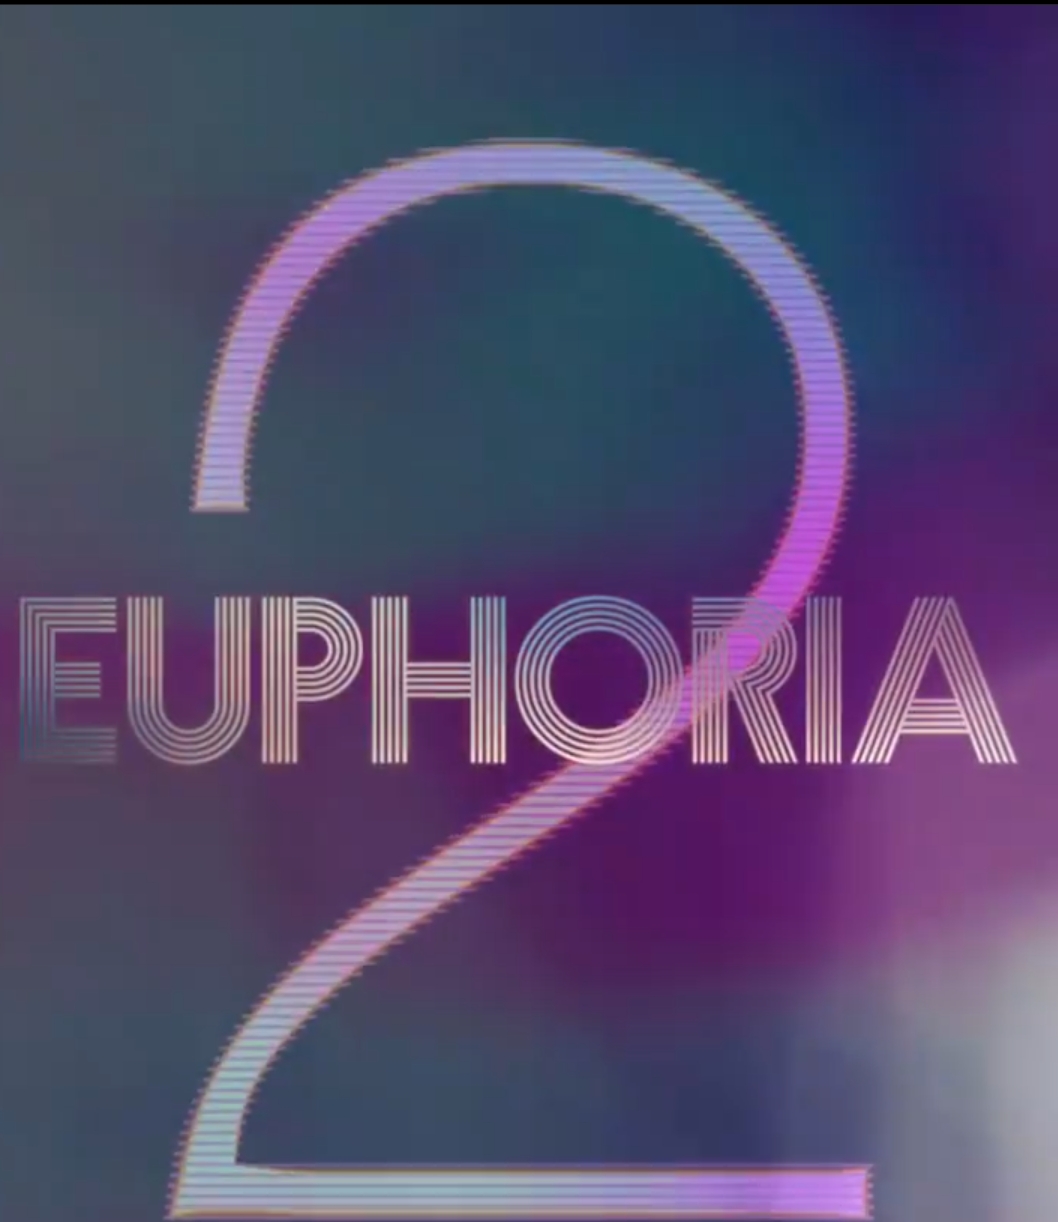 An image showing Euphoria 2, signalling that the series has been renewed for another season.